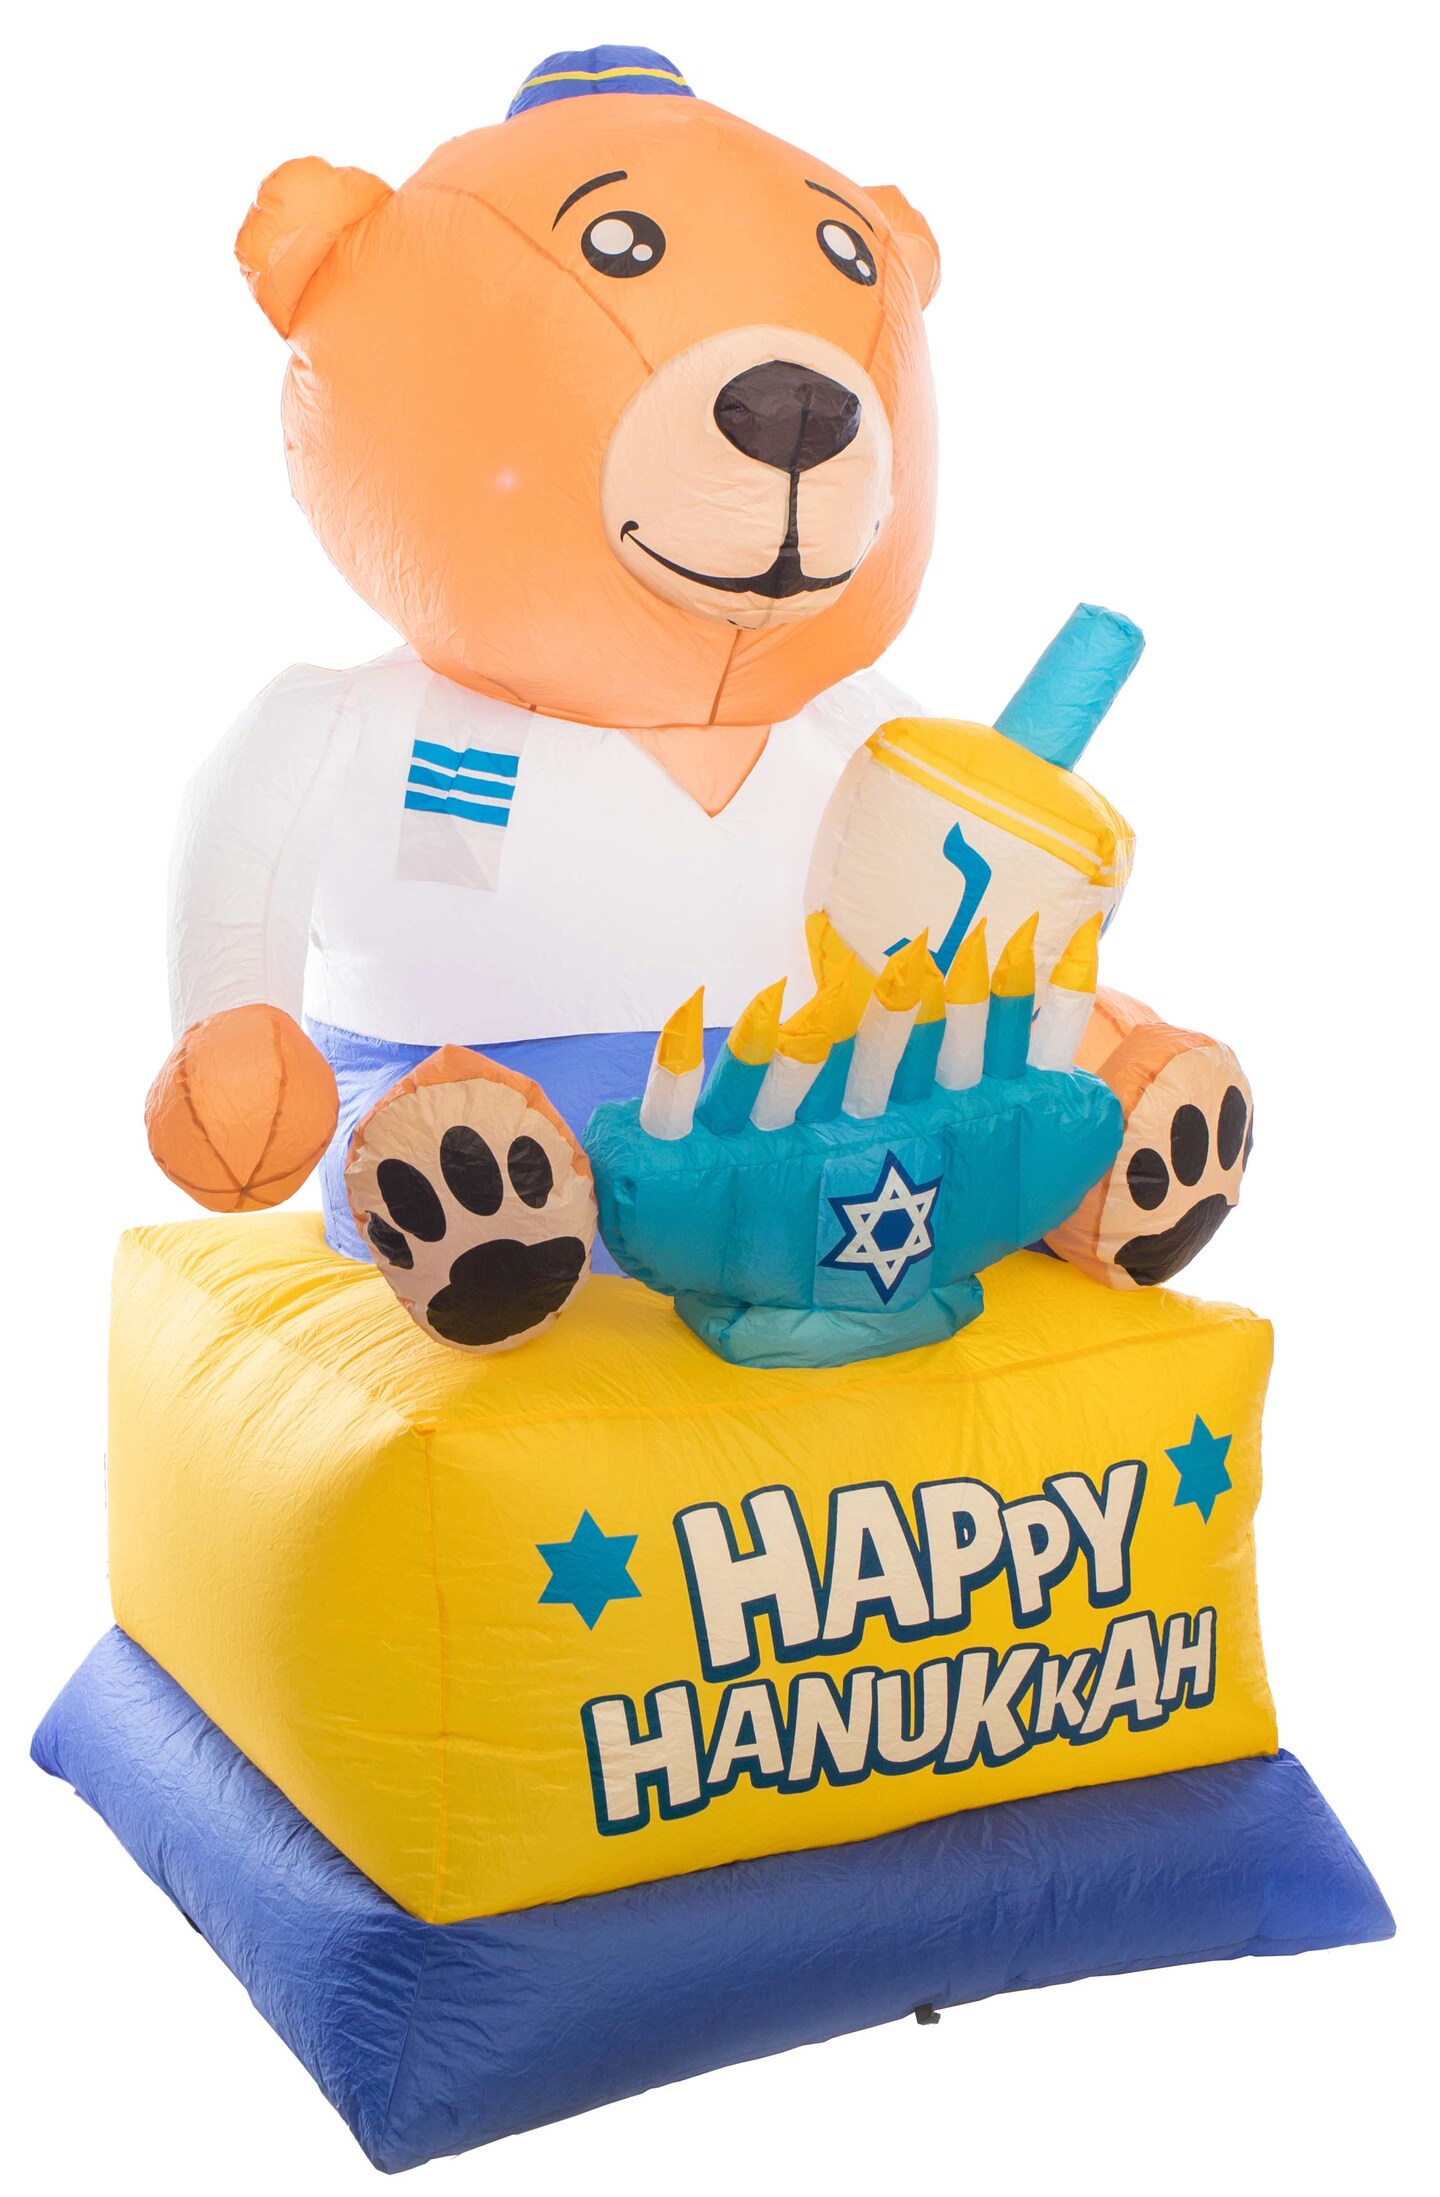 Giant Hanukkah Inflatable Bear - Yard Decor with Built-in Bulbs, Tie-Down Points, and Powerful Built in Fan